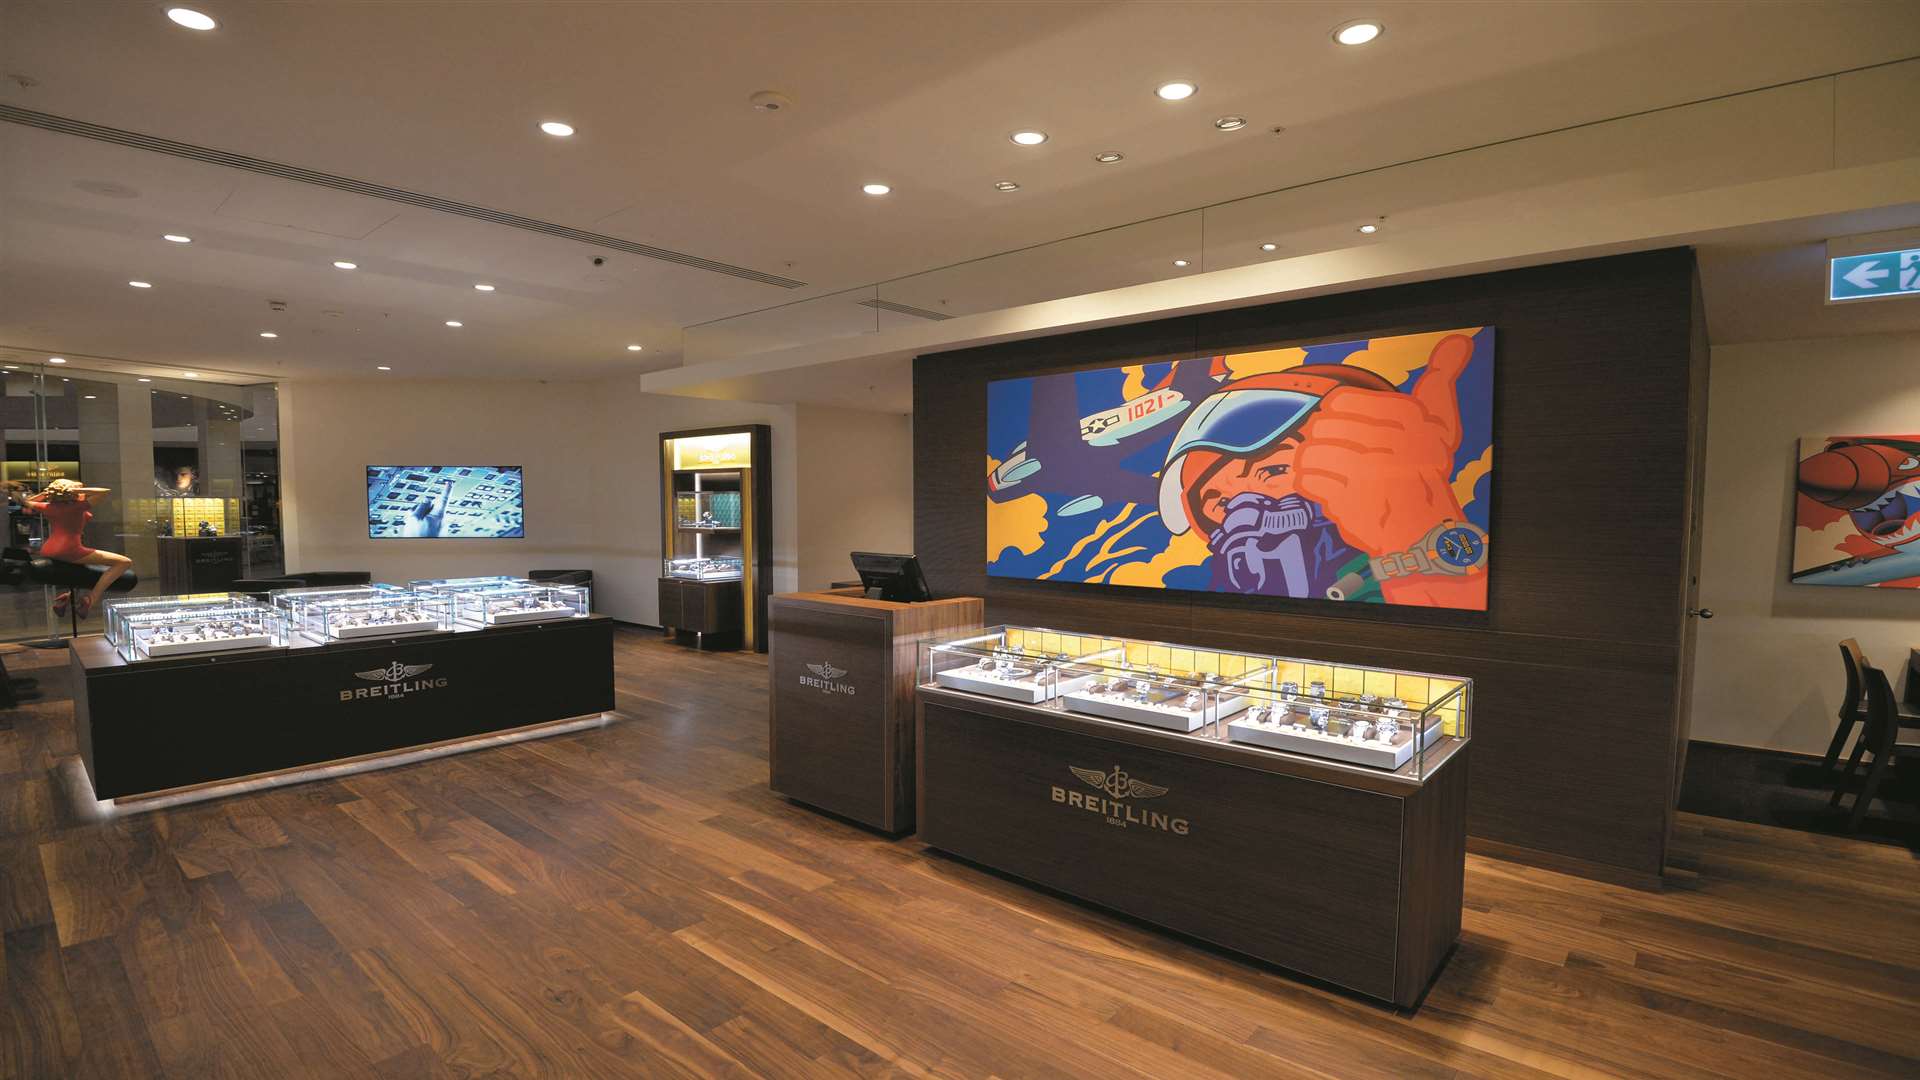 Breitling has opened a new store in Bluewater